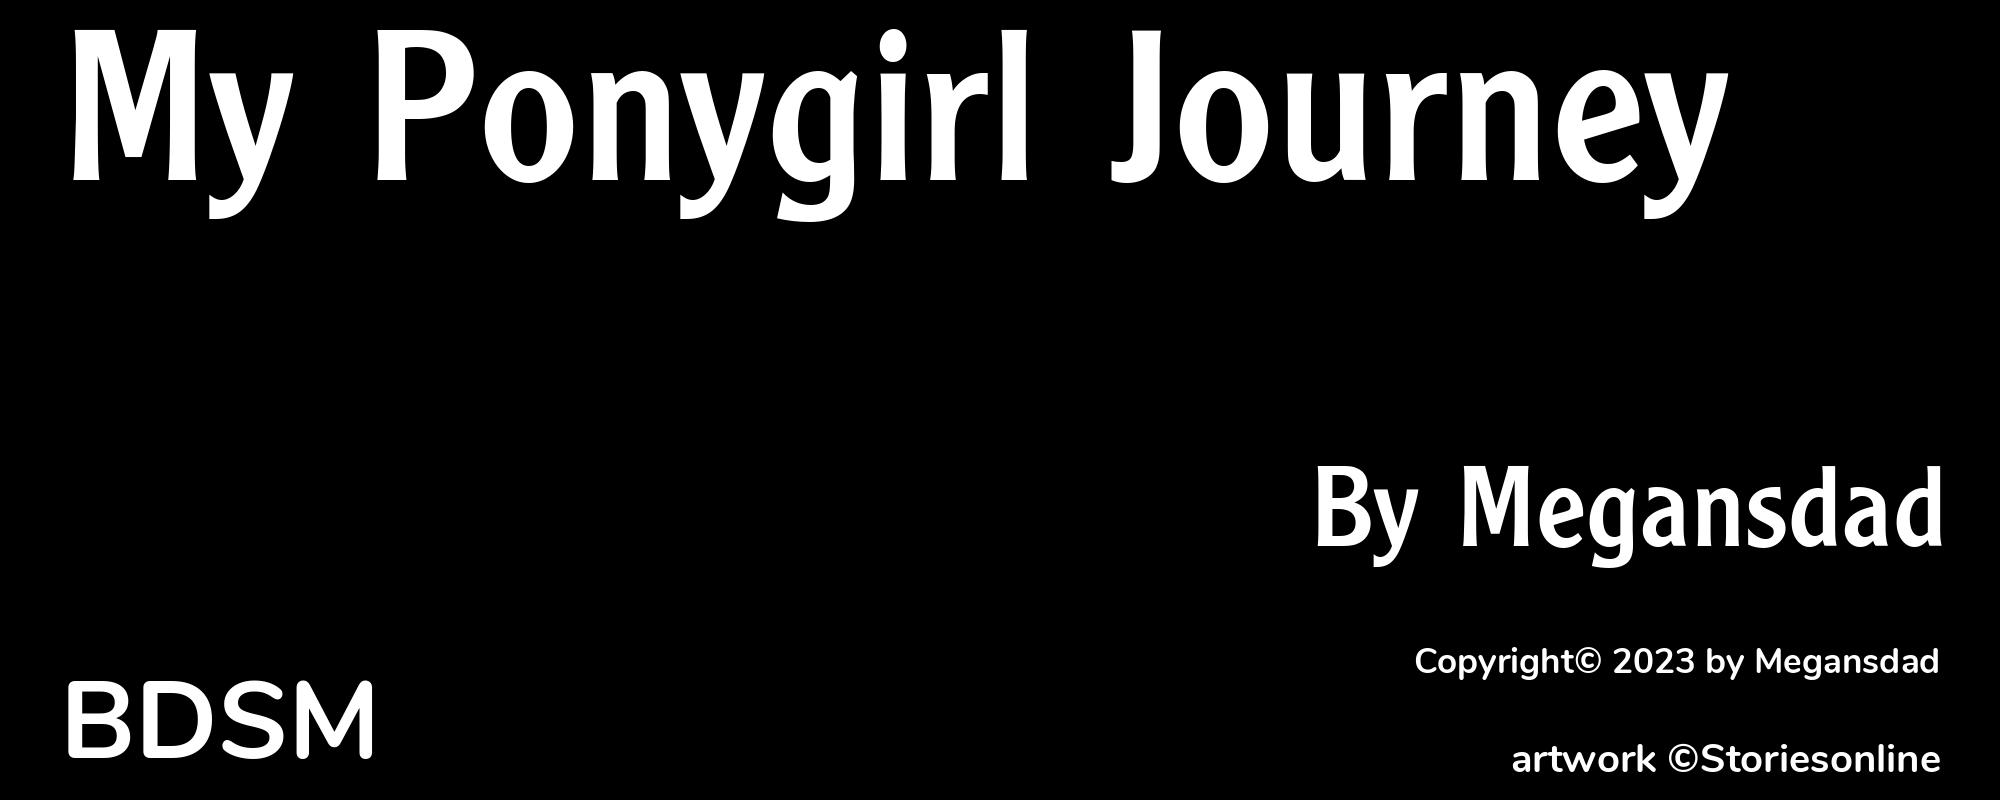 My Ponygirl Journey - Cover